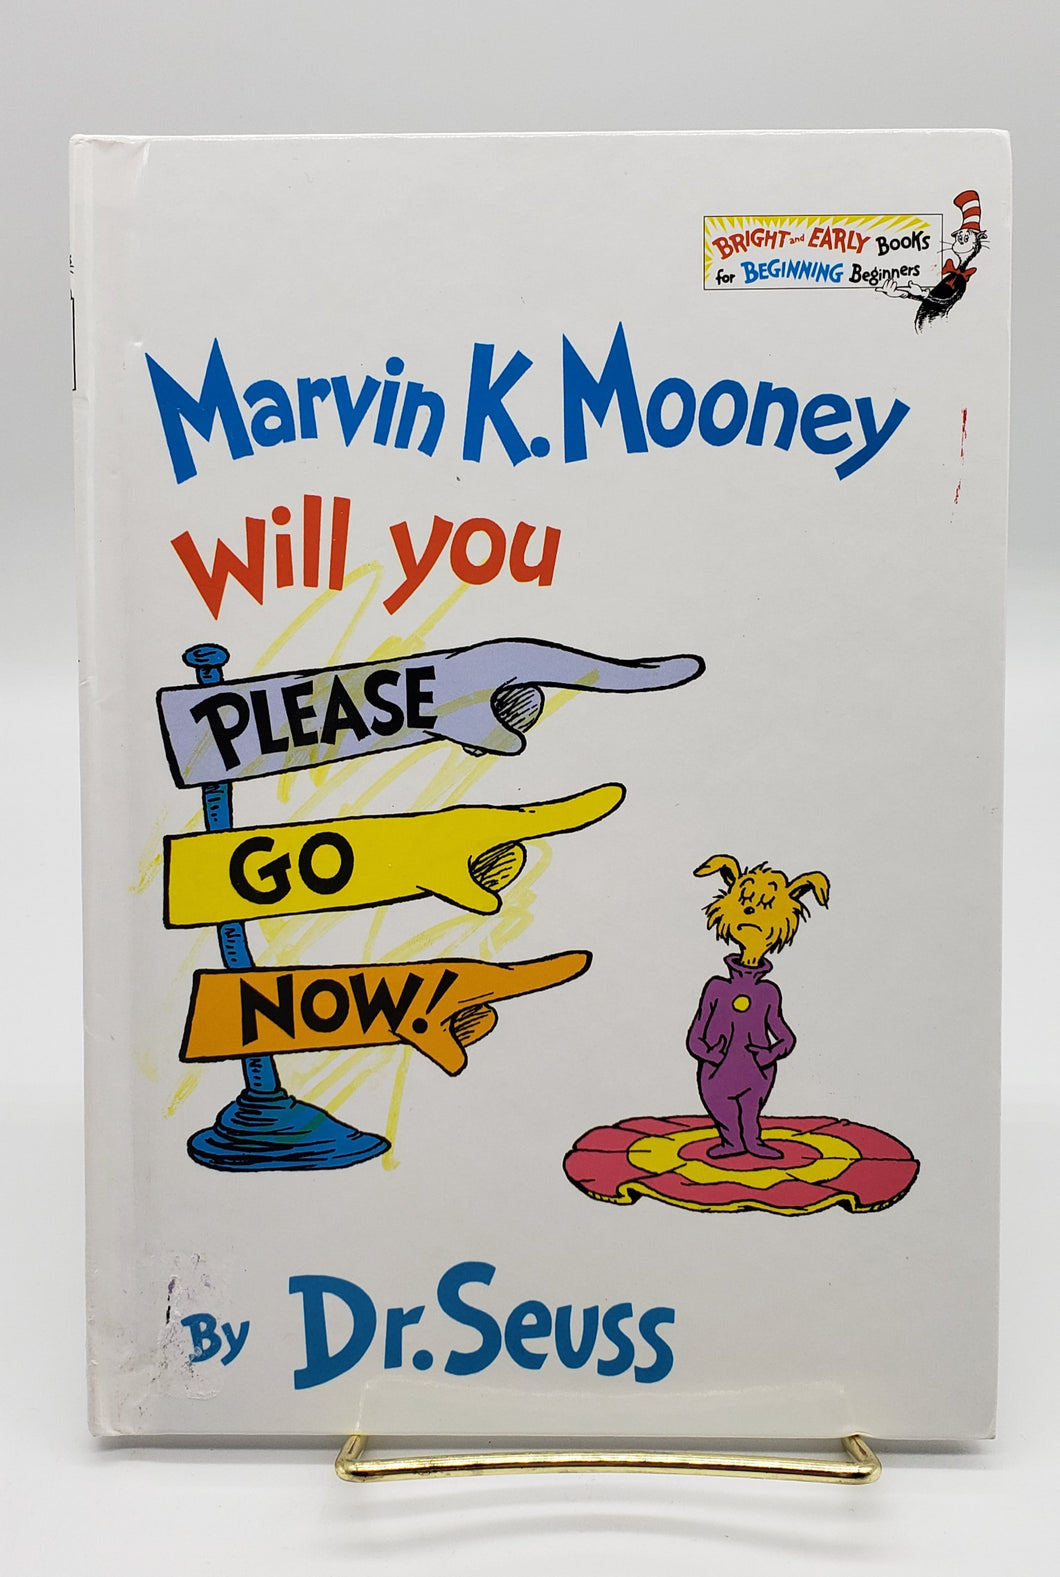 Dr Seuss - Marvin K Mooney will you please go now